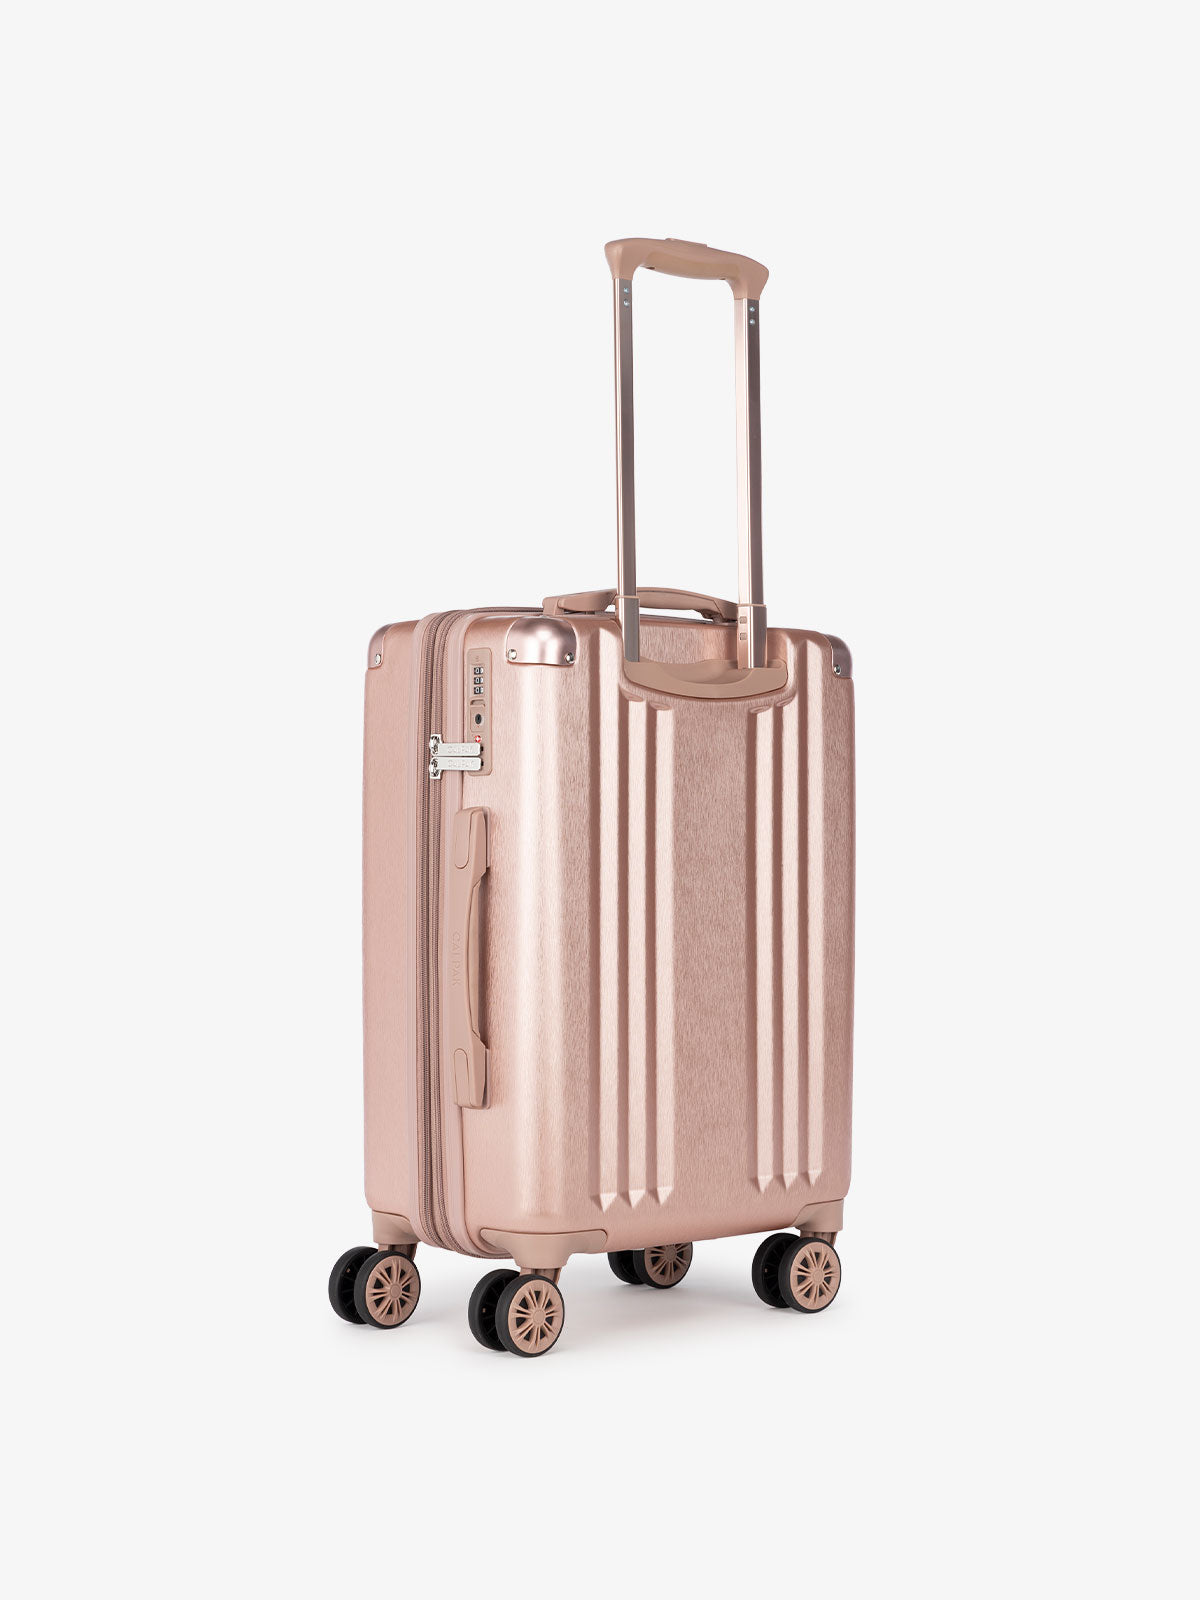 CALPAK Ambeur rose gold 22 inch hard shell rolling spinner carry on luggage